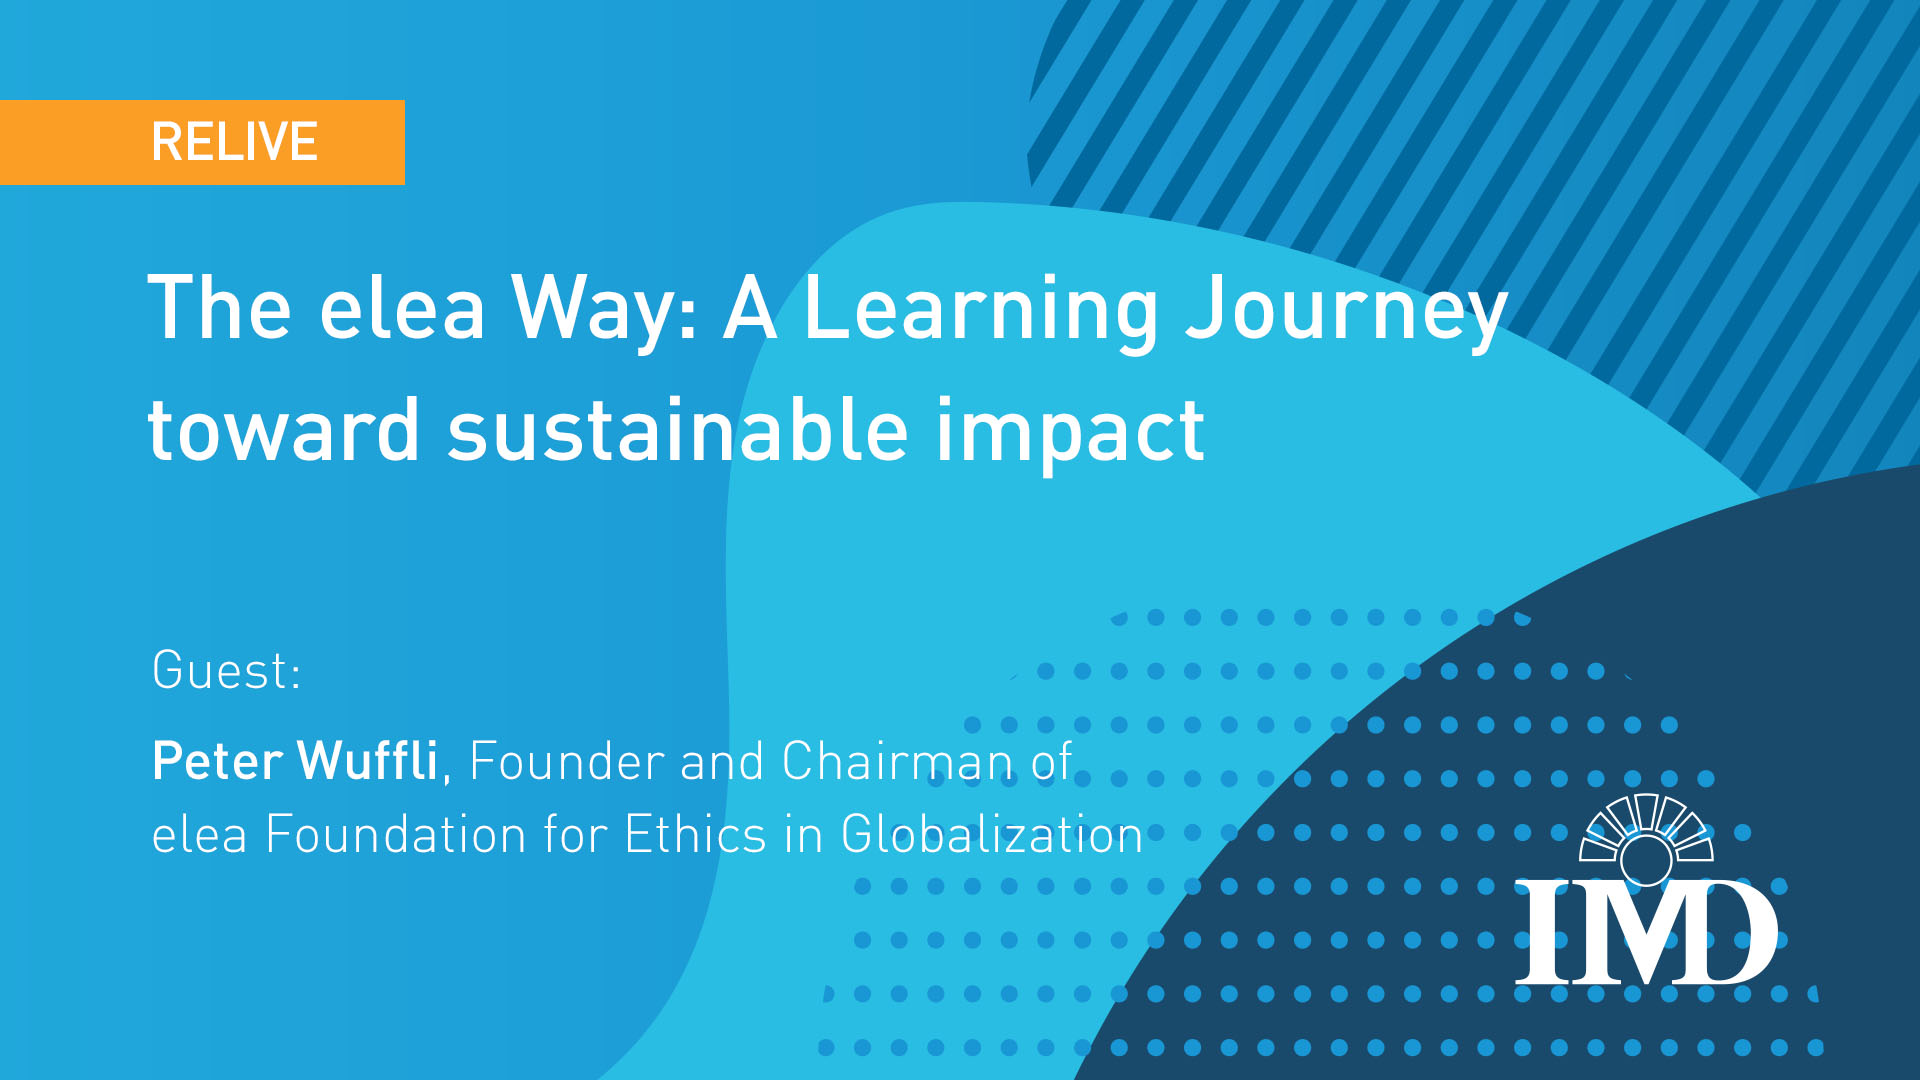 The elea Way: a learning journey toward sustainable impact